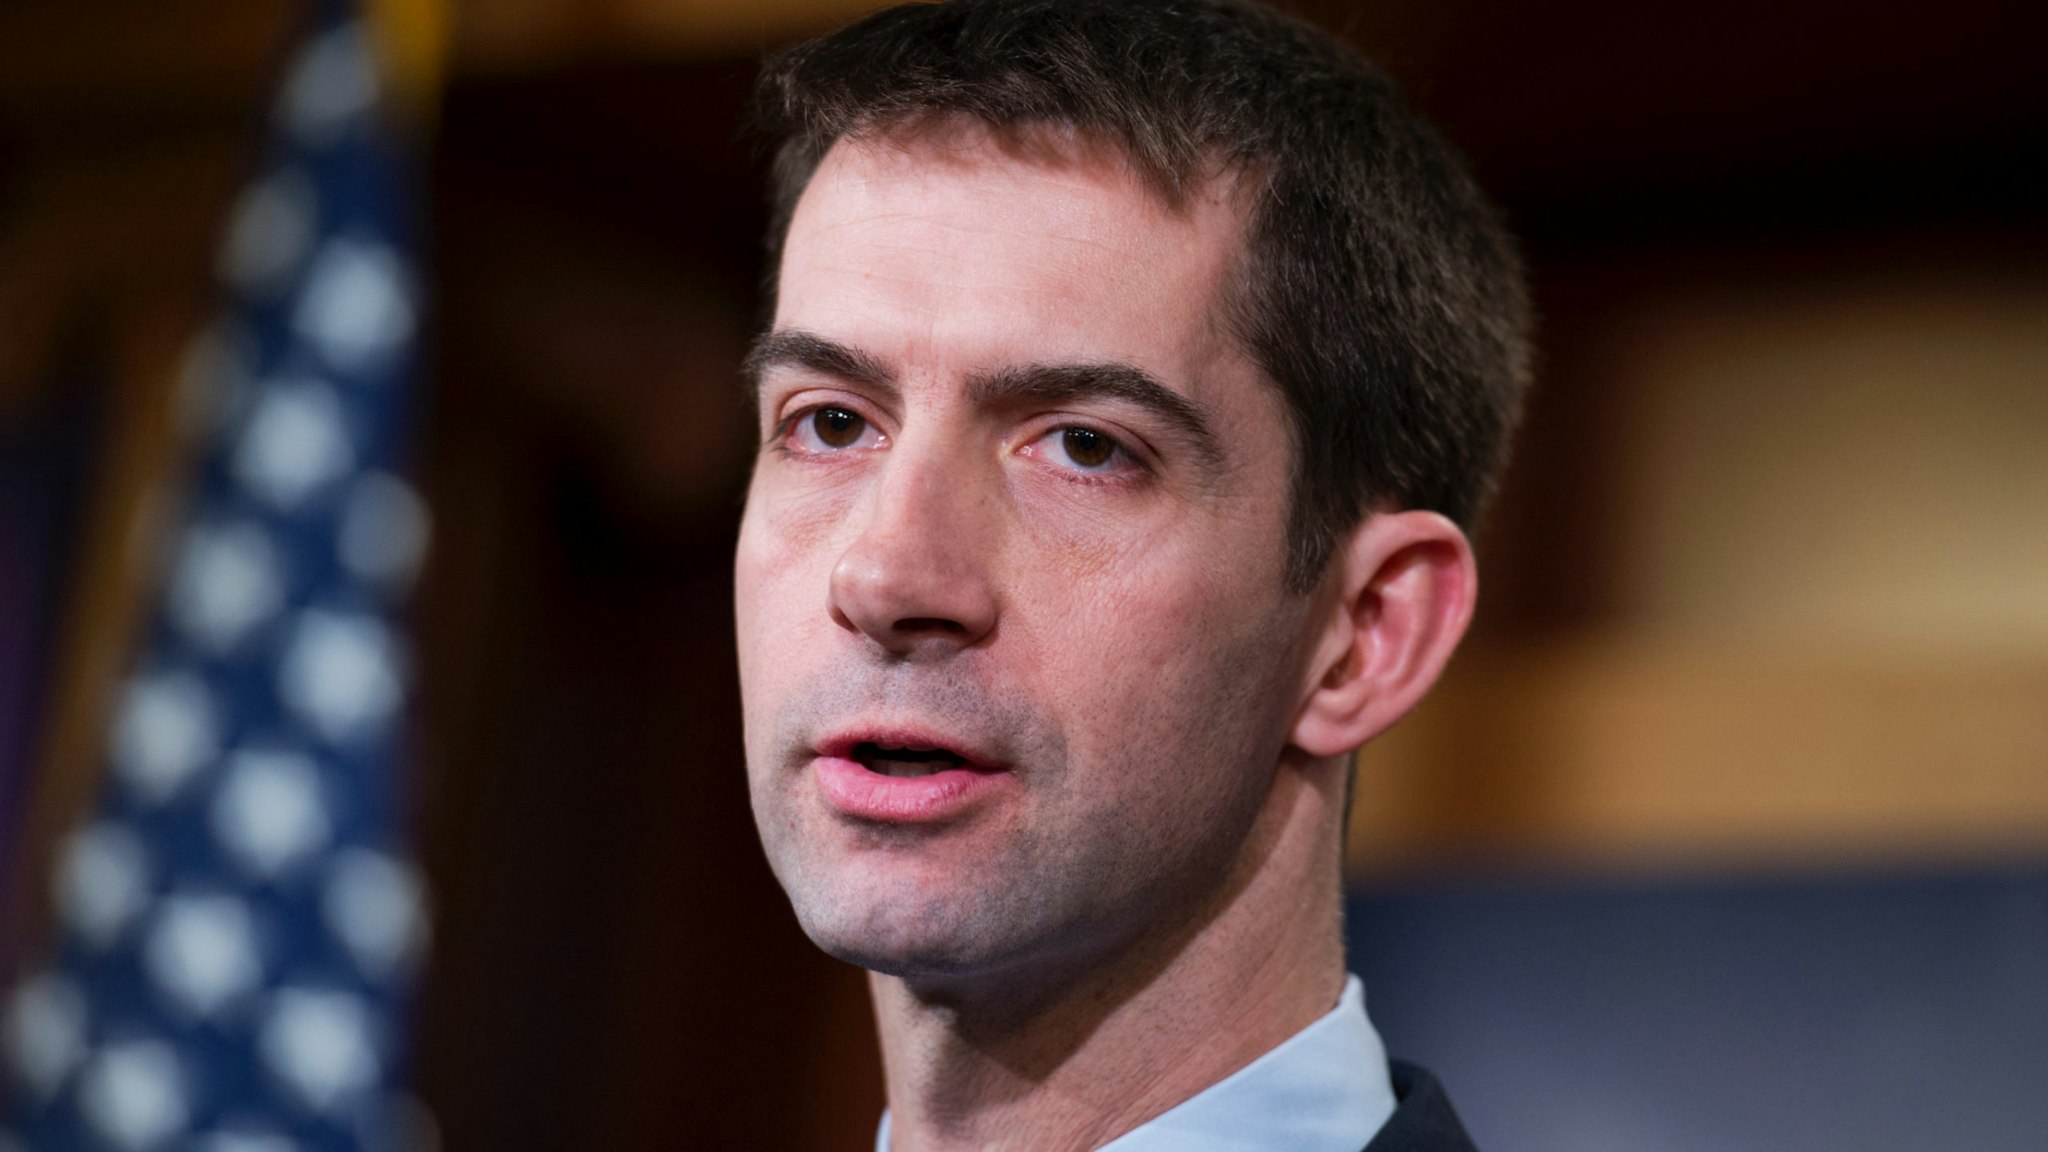 Sen. Tom Cotton, R-Ark., speaks during a news conference in the Capitol's Senate studio on the possibility of arming the Ukrainians in their conflict with Russian-backed rebels, February 5, 2015.